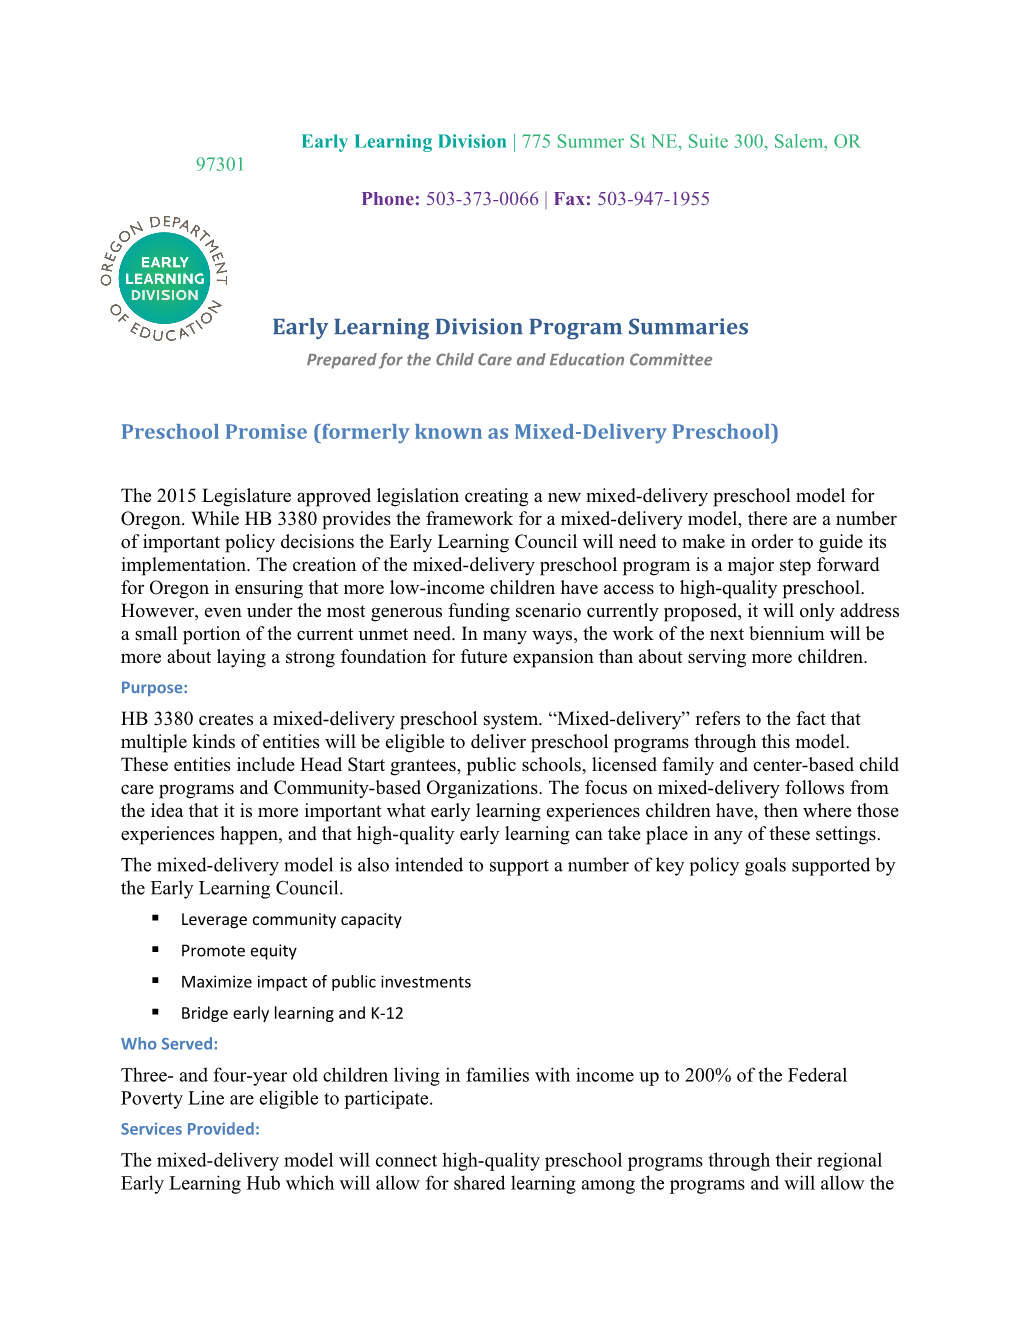 Early Learning Division Program Summaries